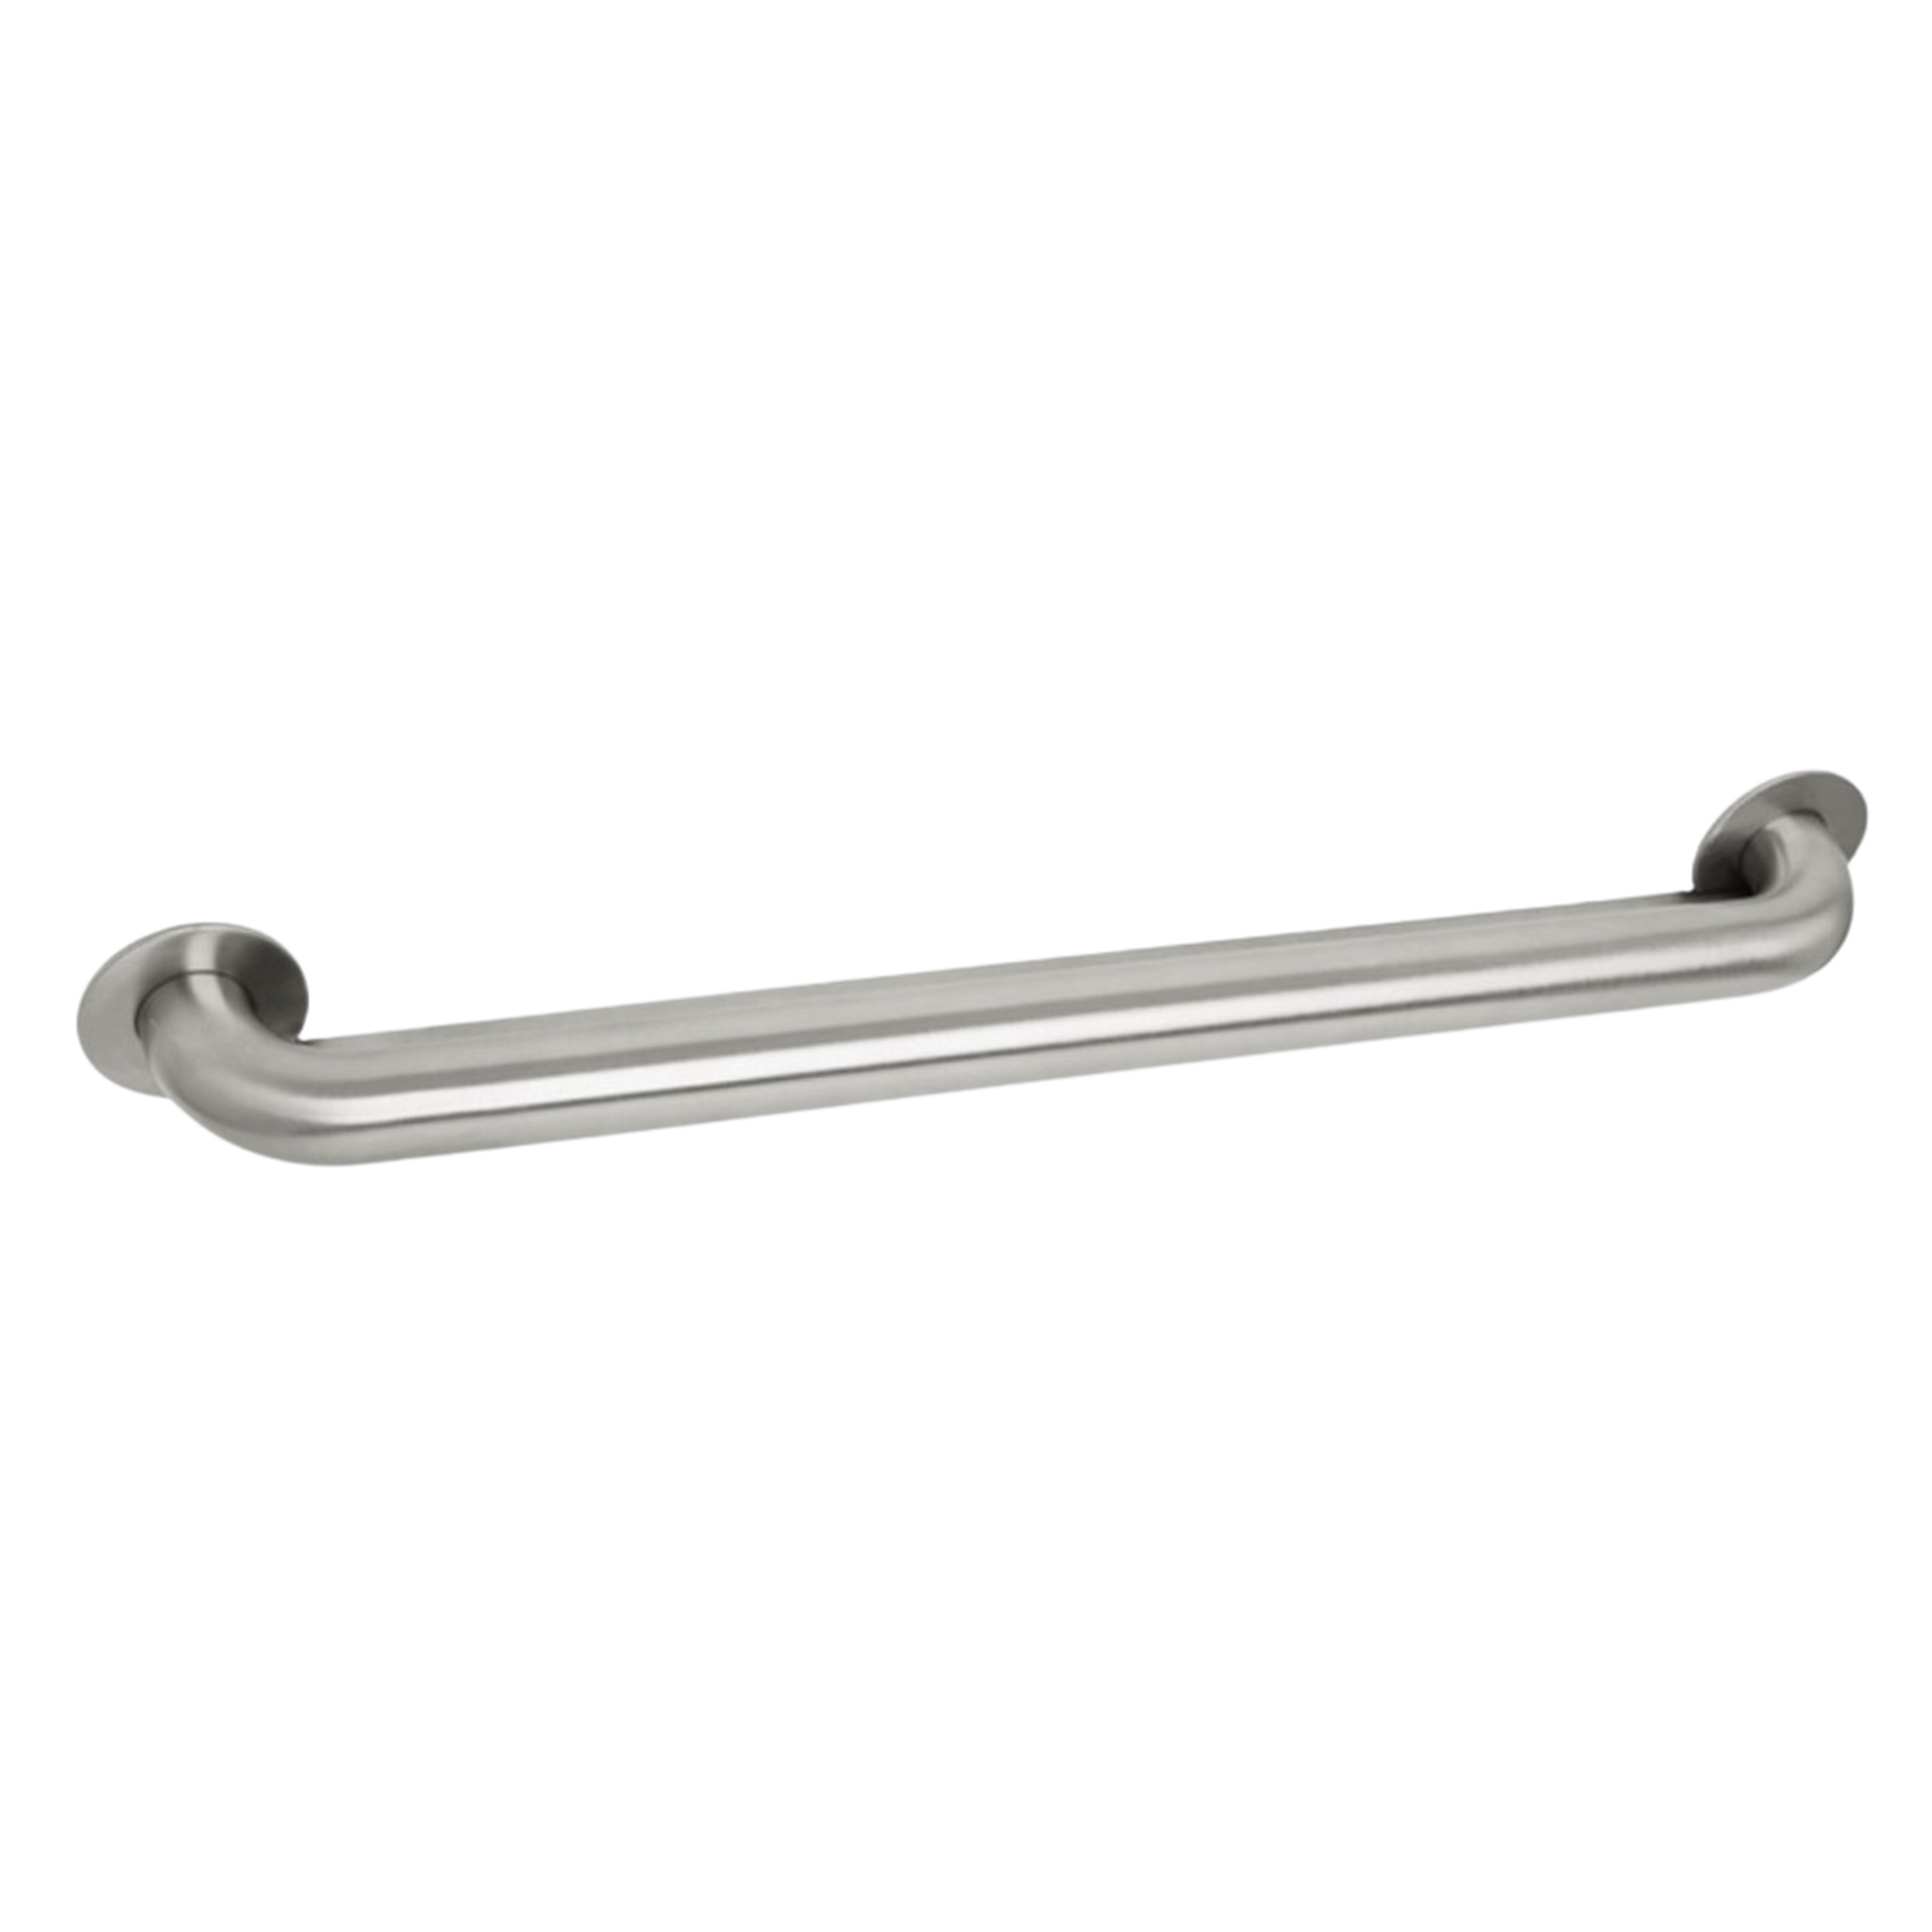 Seachrome Signature Series 24" Satin Stainless Steel 1.5 Diameter Exposed Mounting Flange Without Hole Switch Weld Standard Ligature Resistant Grab Bar